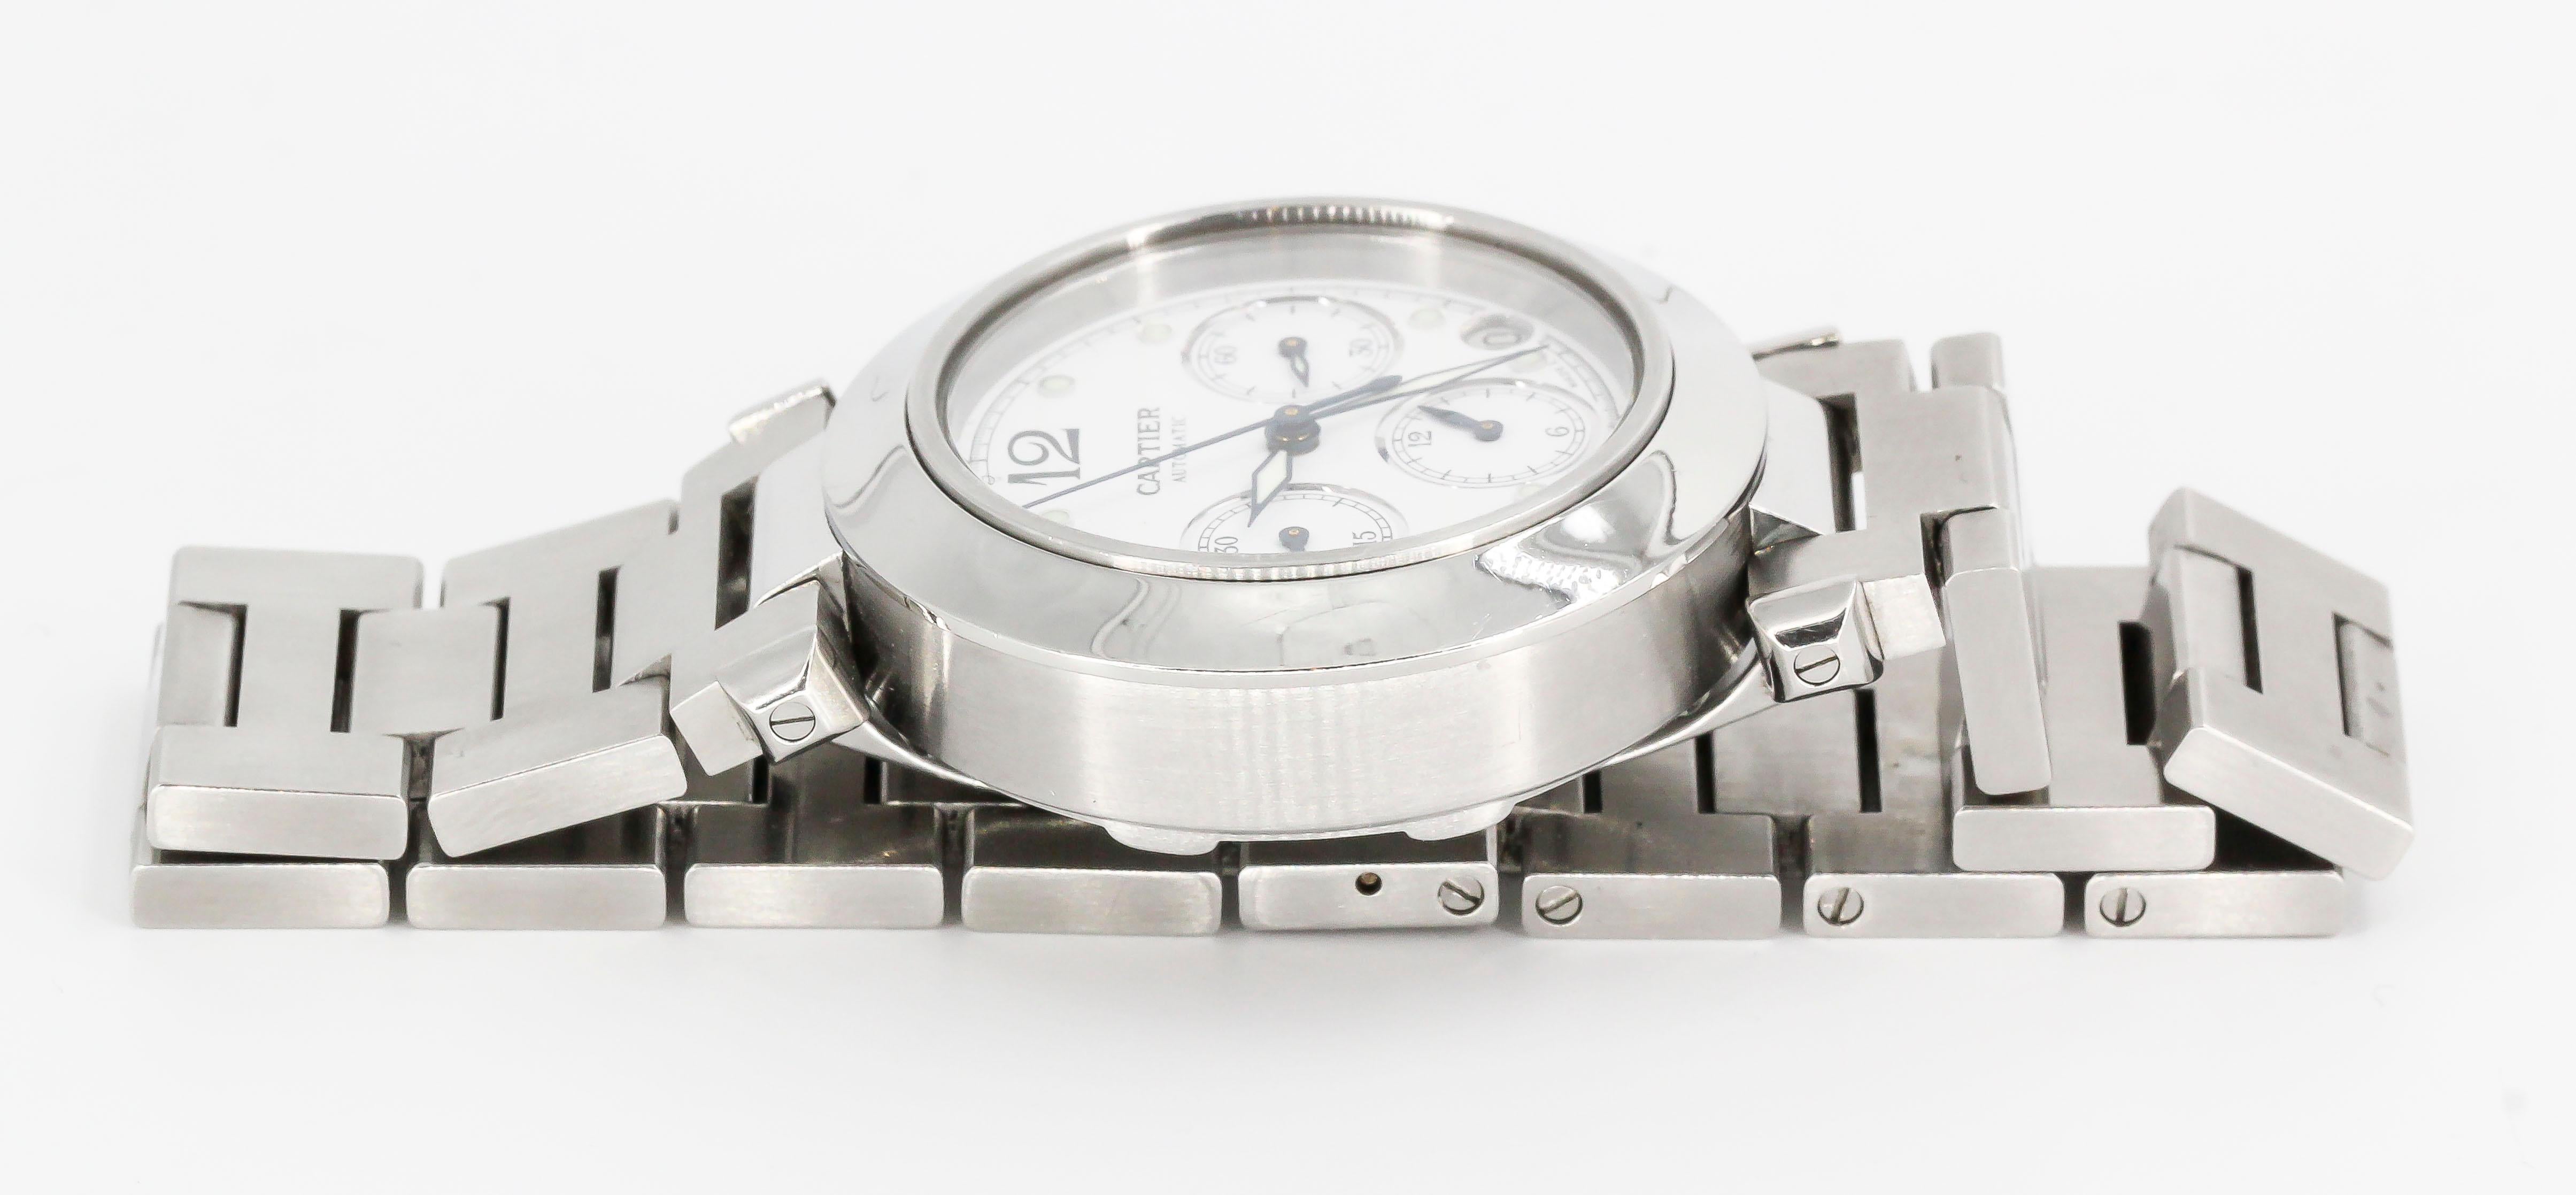 Handsome stainless steel wristwatch from the 